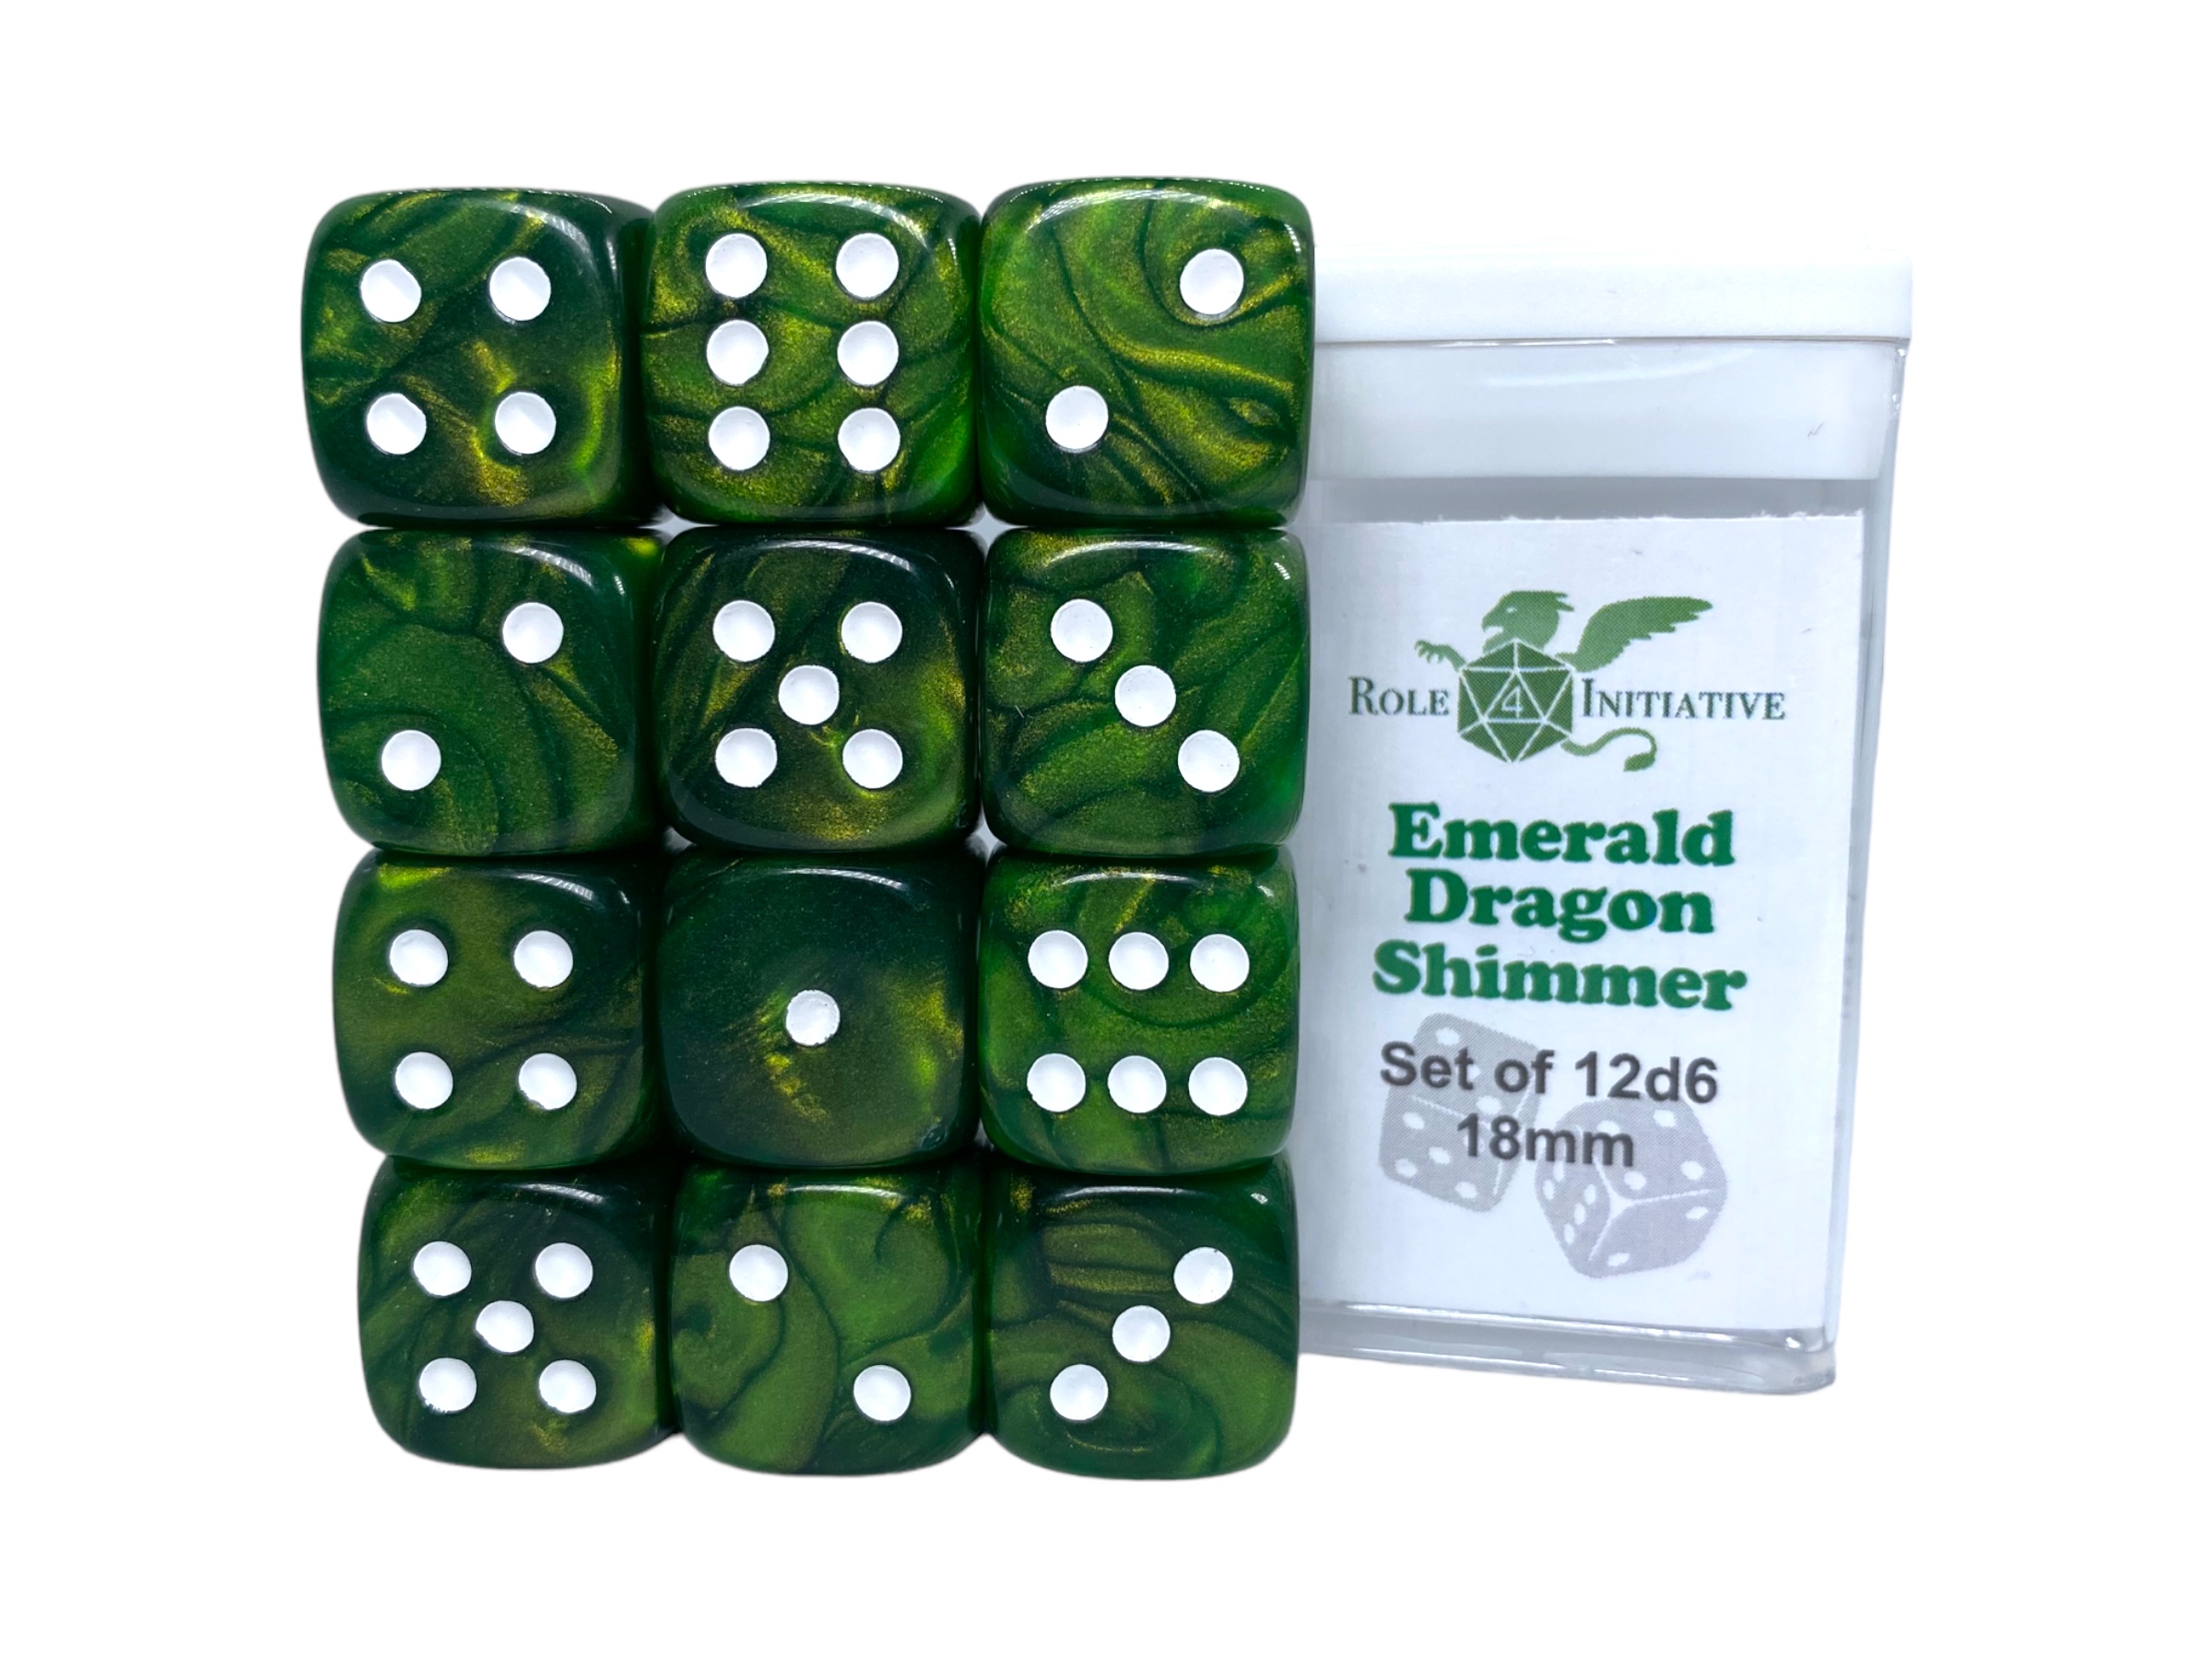 Role 4 Initiative: 12 D6 Pips Dice Set: Emerald Dragon Shimmer 18MM 